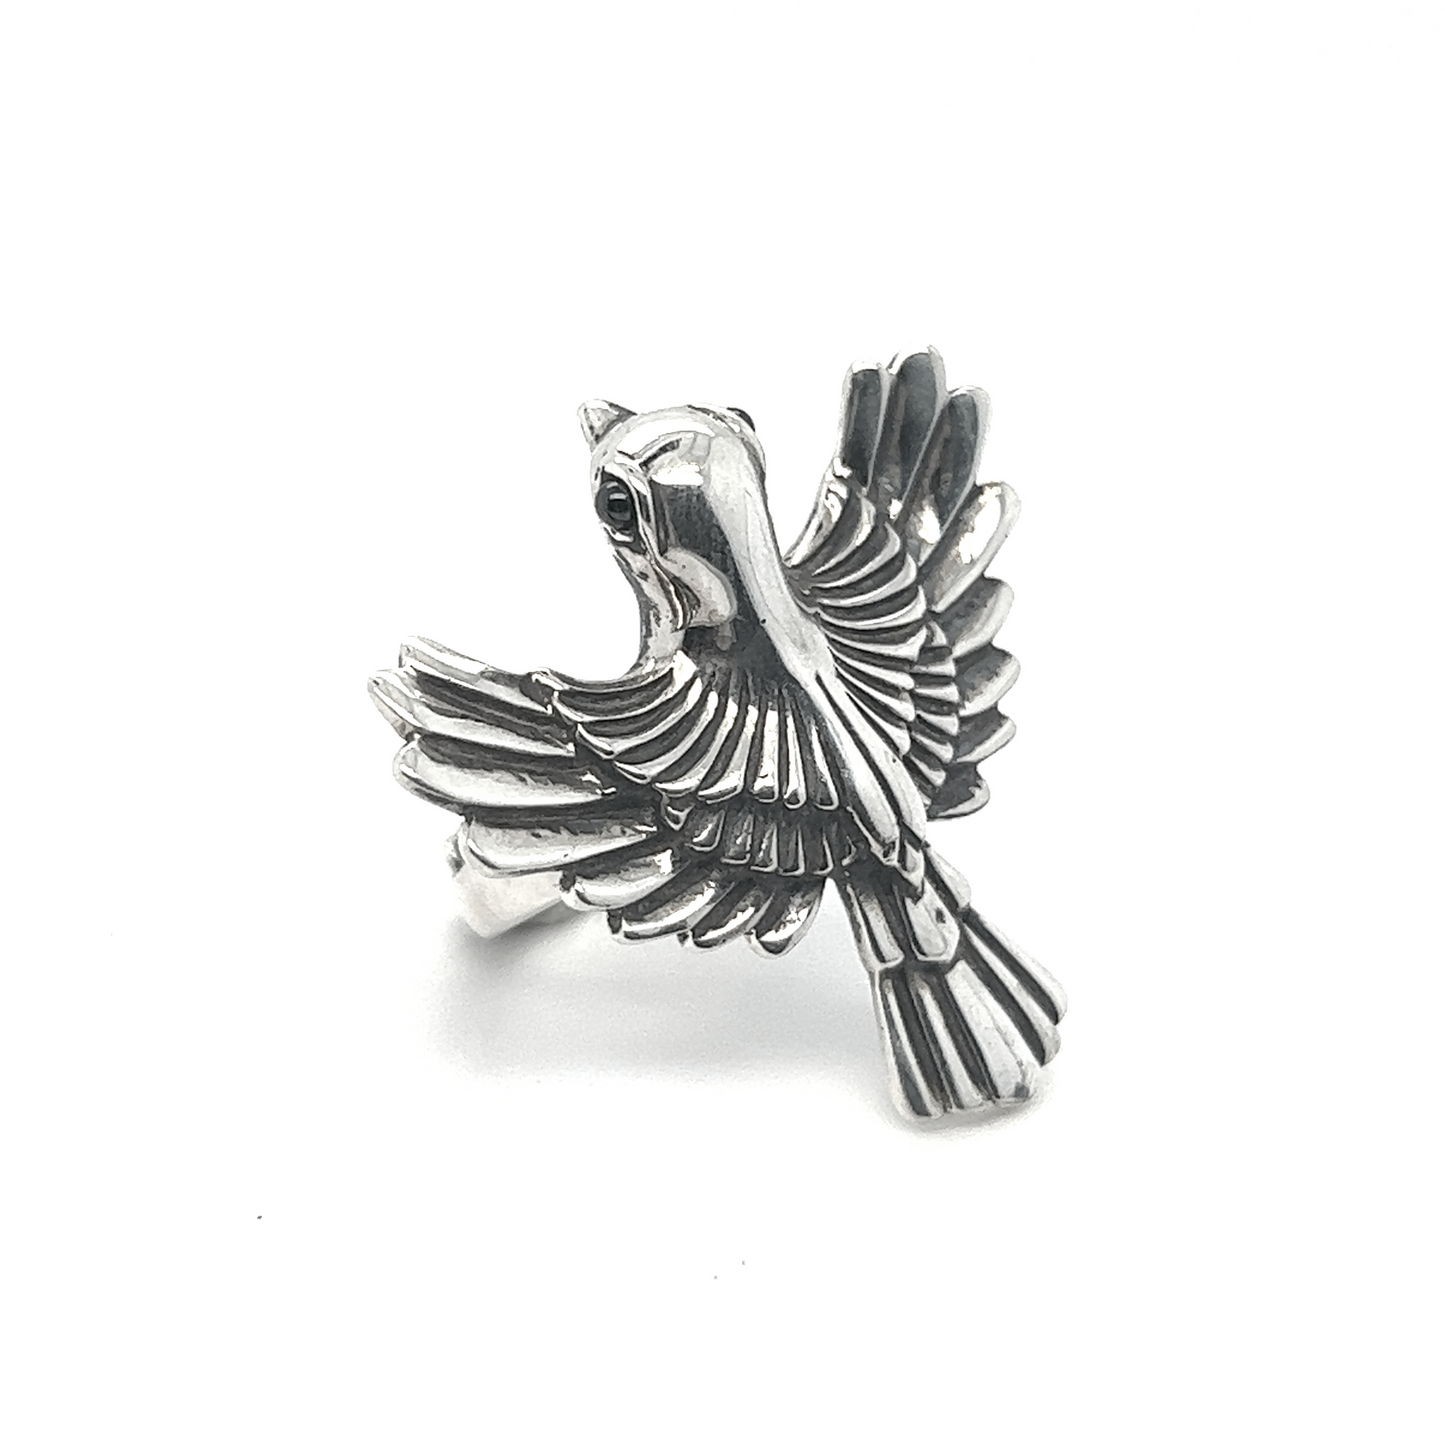 A bold, Statement Sparrow Ring on a white background.